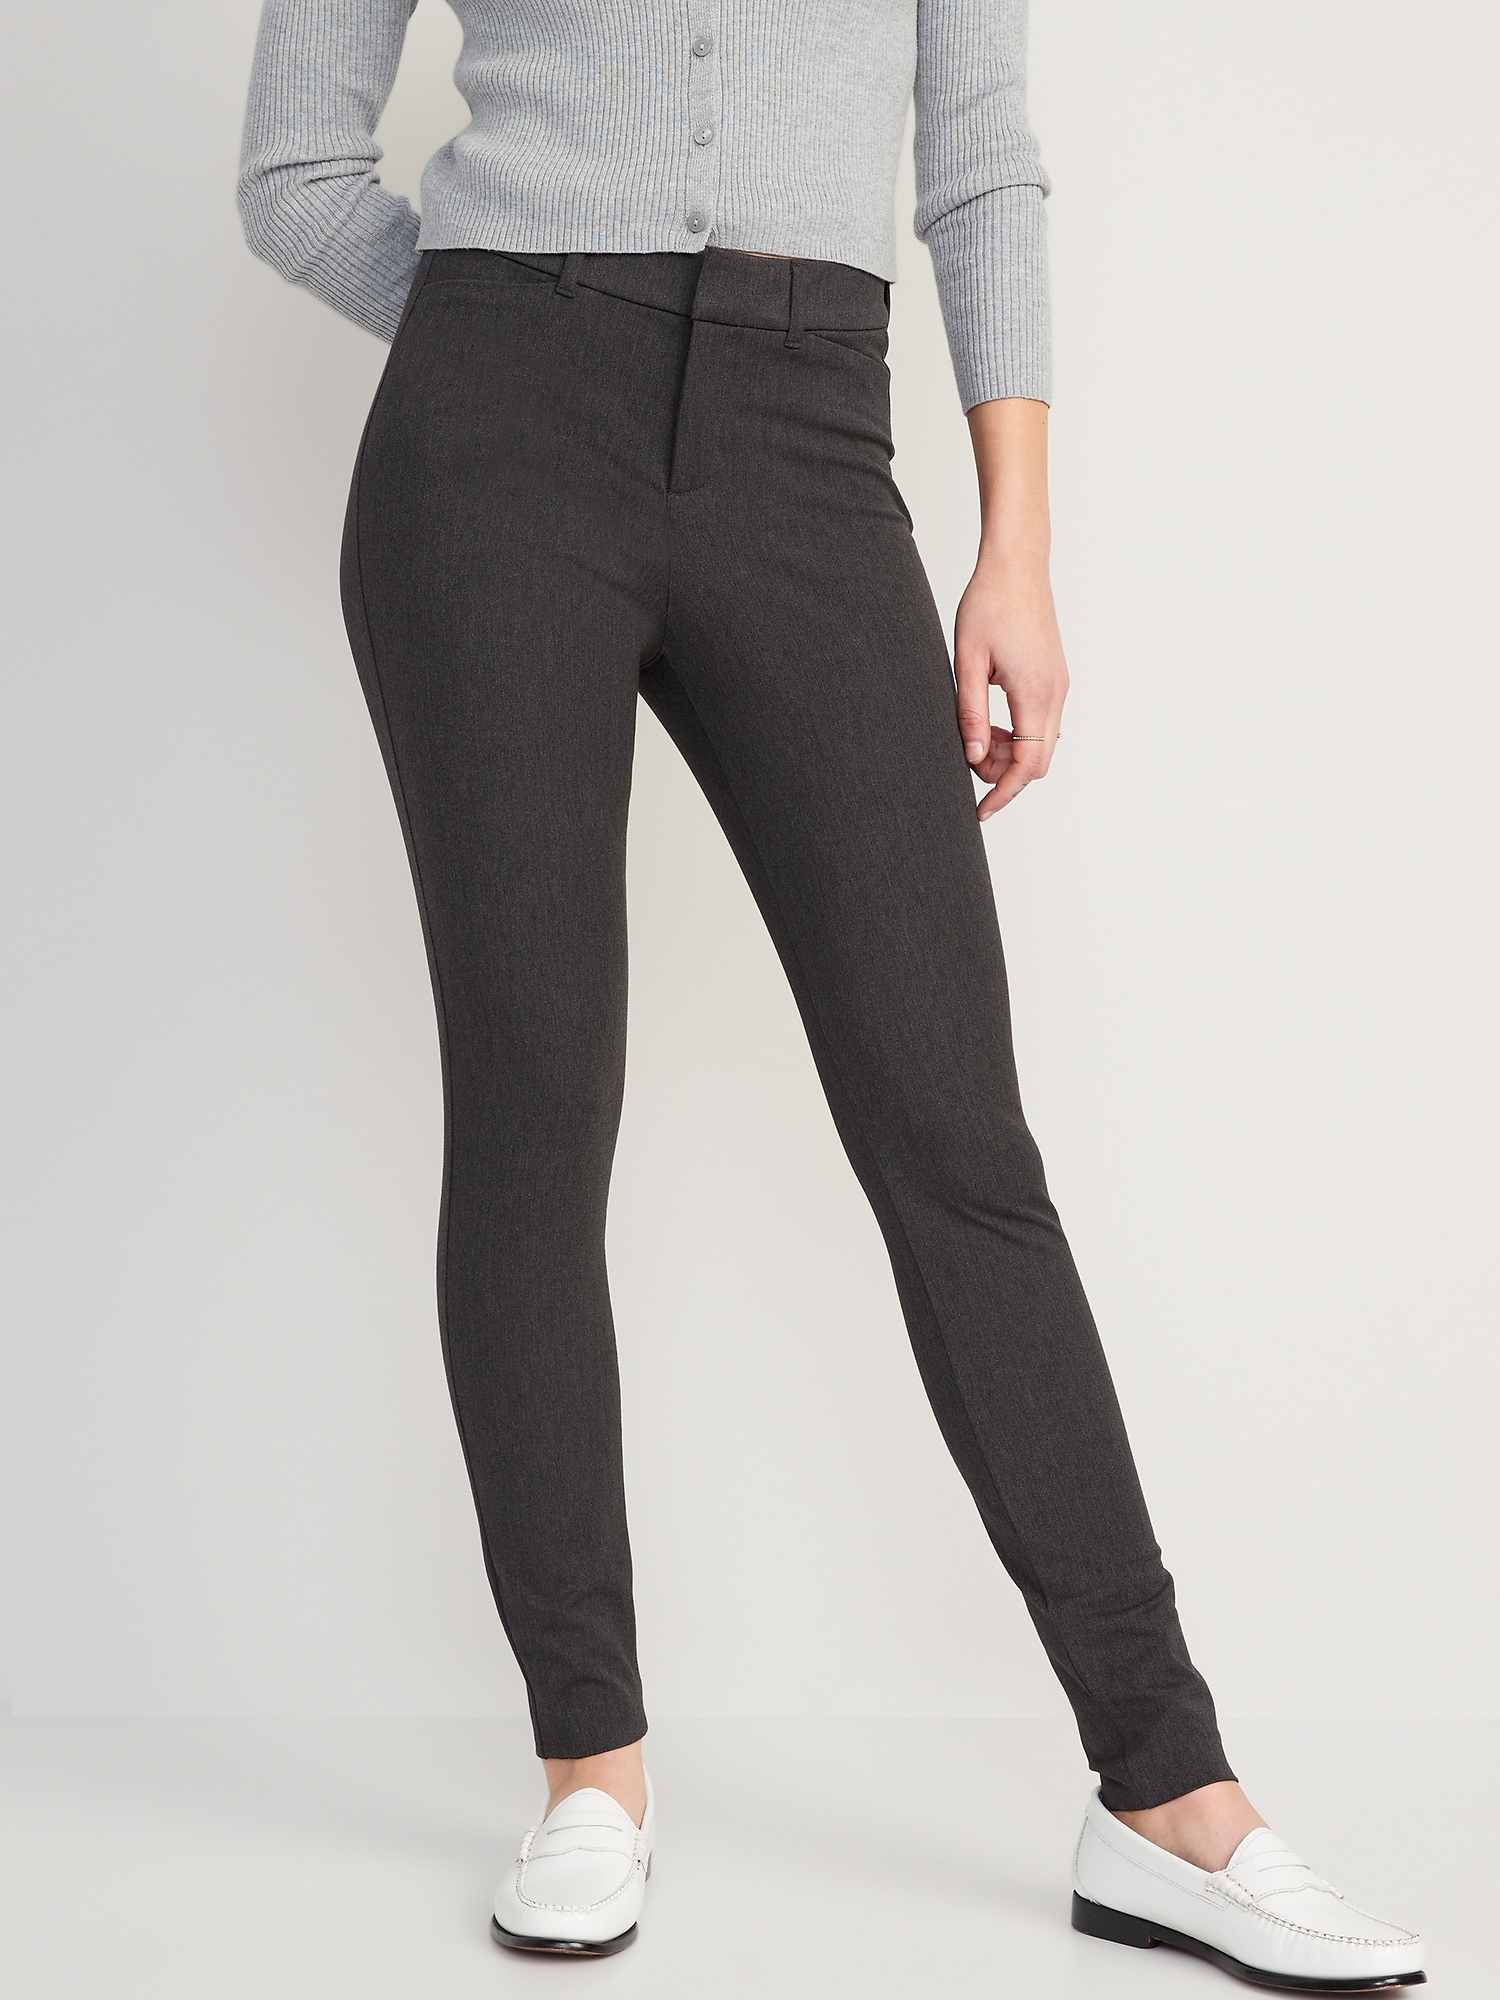 High-Waisted Pixie Skinny Pants for Women Old Navy